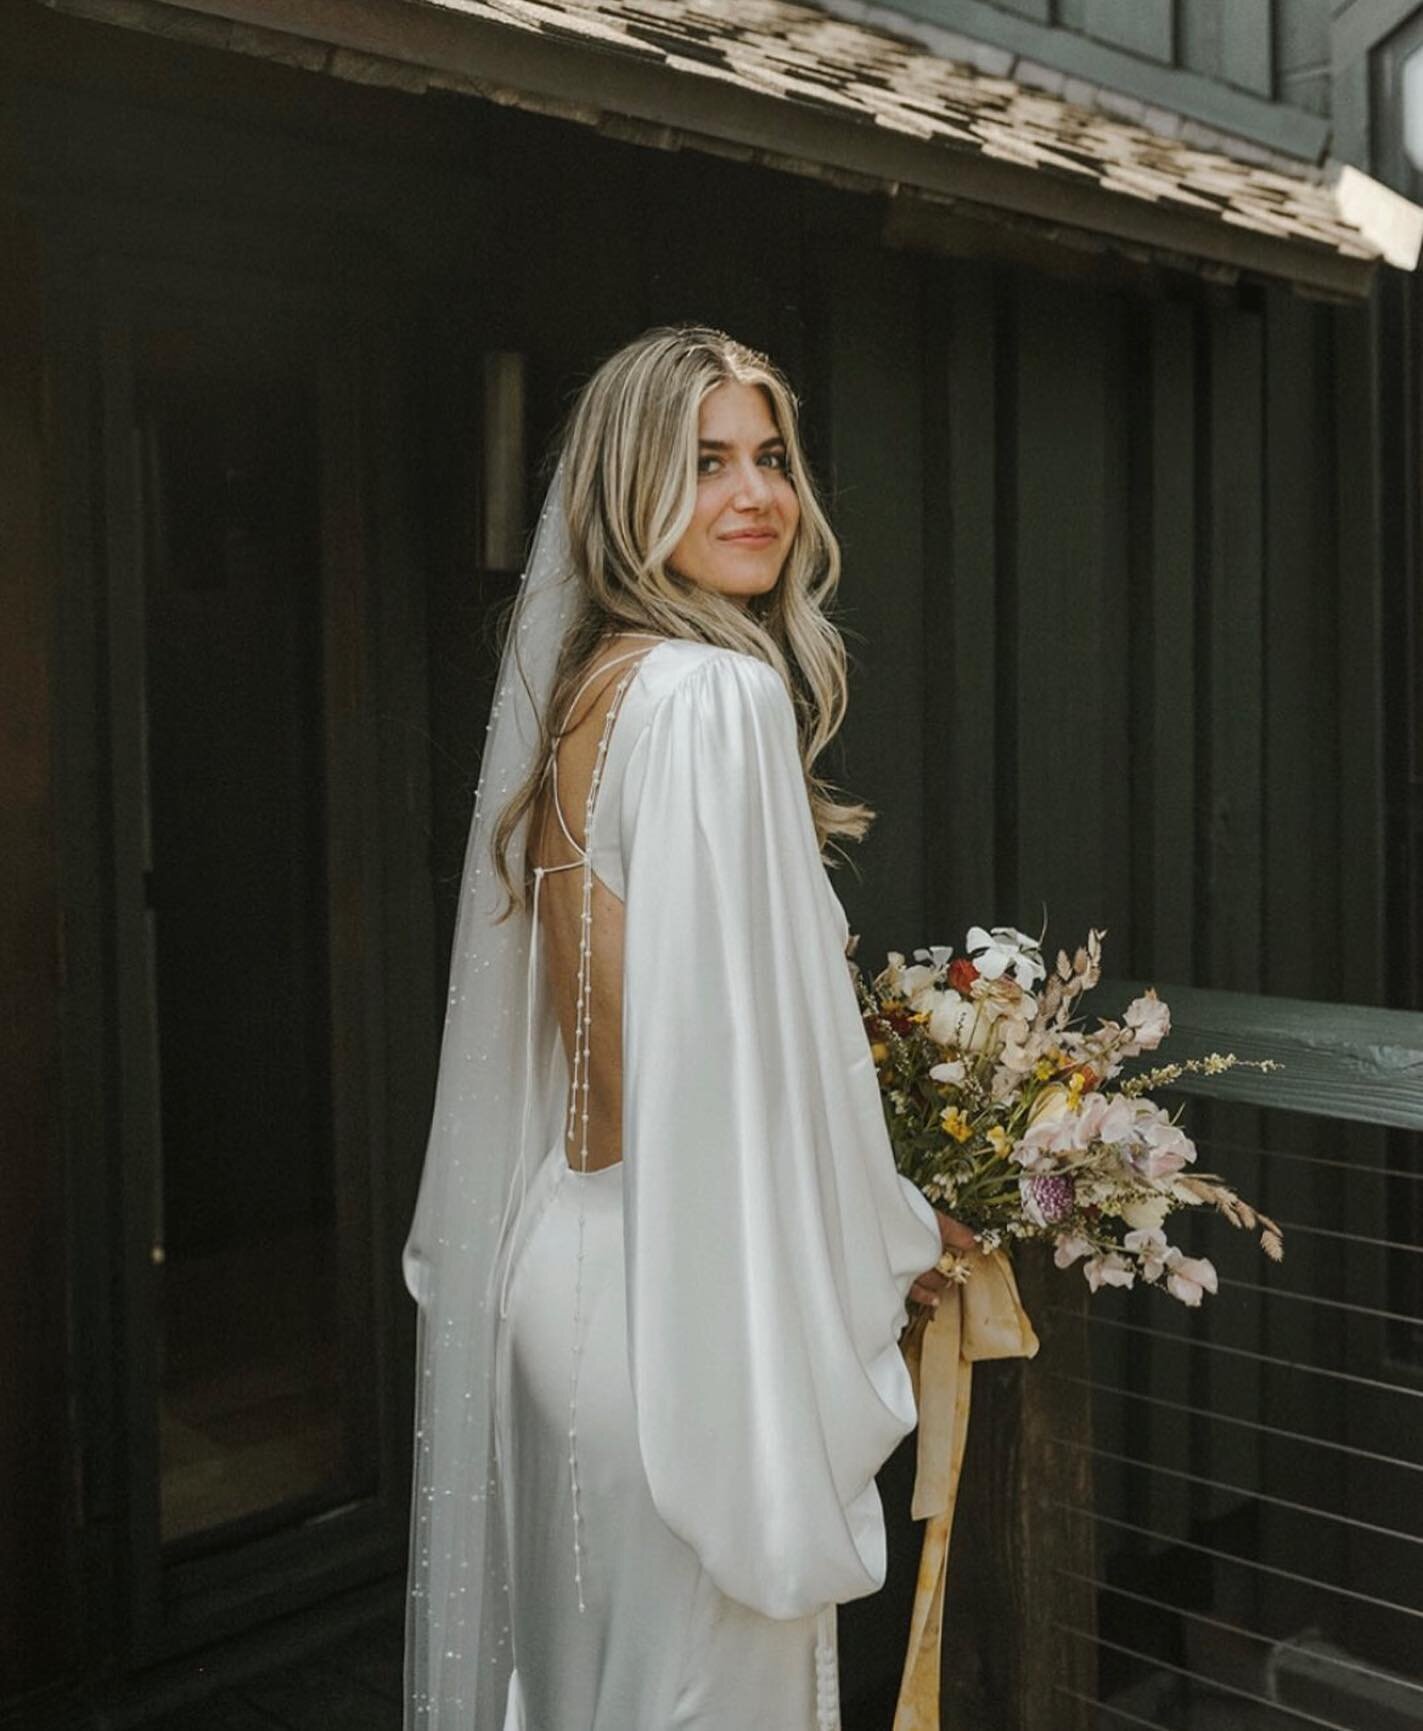 Mrs. Rawles 🤍 obsessed with this effortless, timeless bridal look 🤍 blonde color, cut, and style by LHS stylist @alanaciera